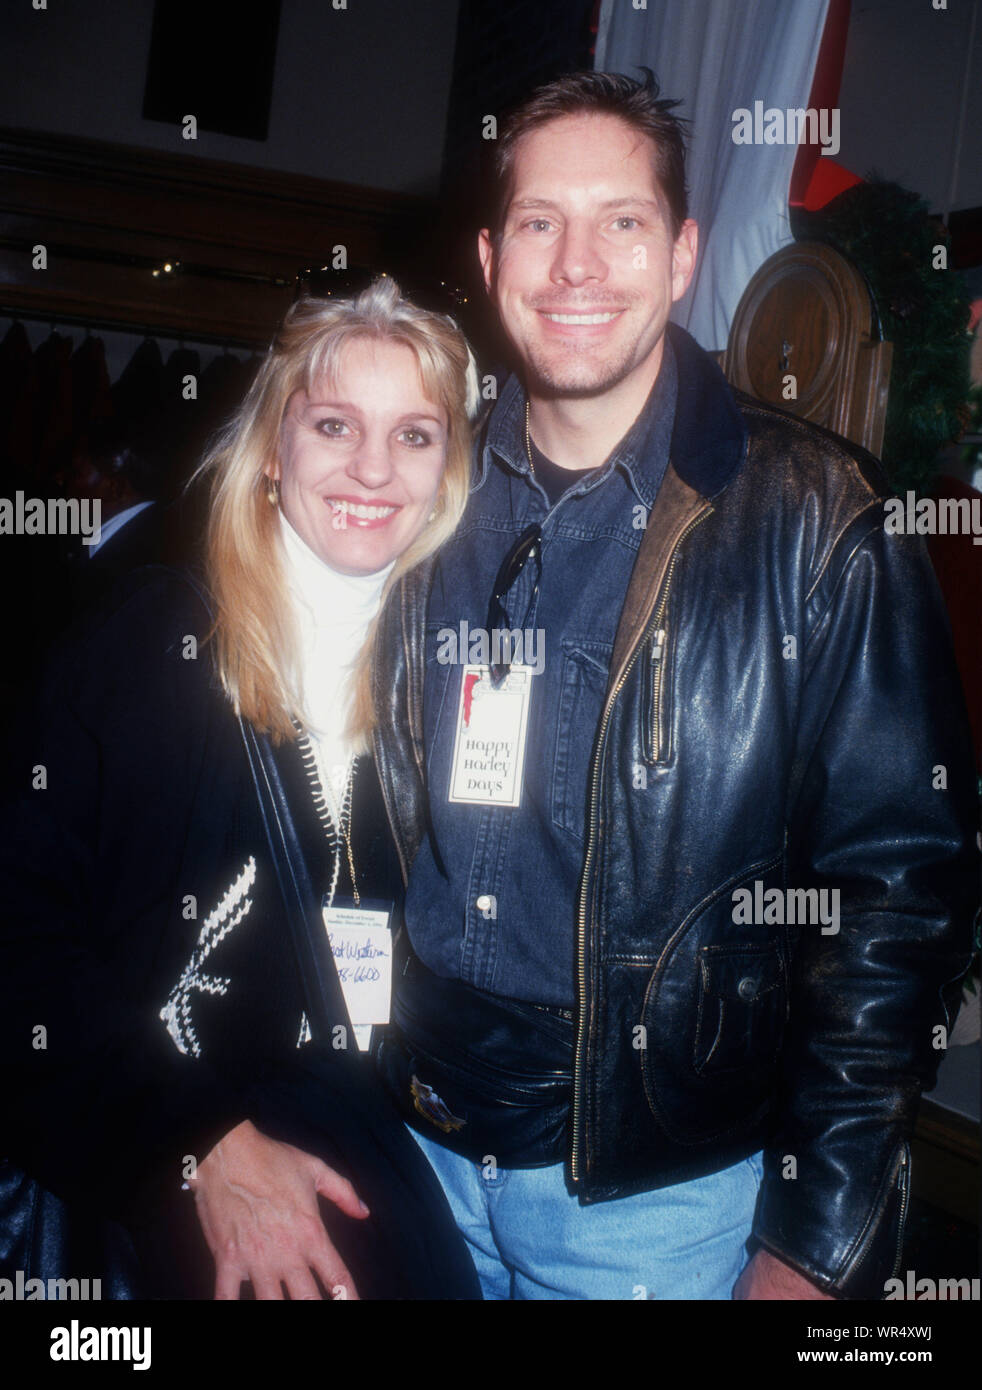 Beverly Hills, California, USA 4th December 1994 Georganne LaPiere and husband Ed Bartylak attend 'Happy Harley Days/Rejoice on Rodeo' Parade on December 4, 1994 in Beverly Hills, California, USA. Photo by Barry King/Alamy Stock Photo Stock Photo